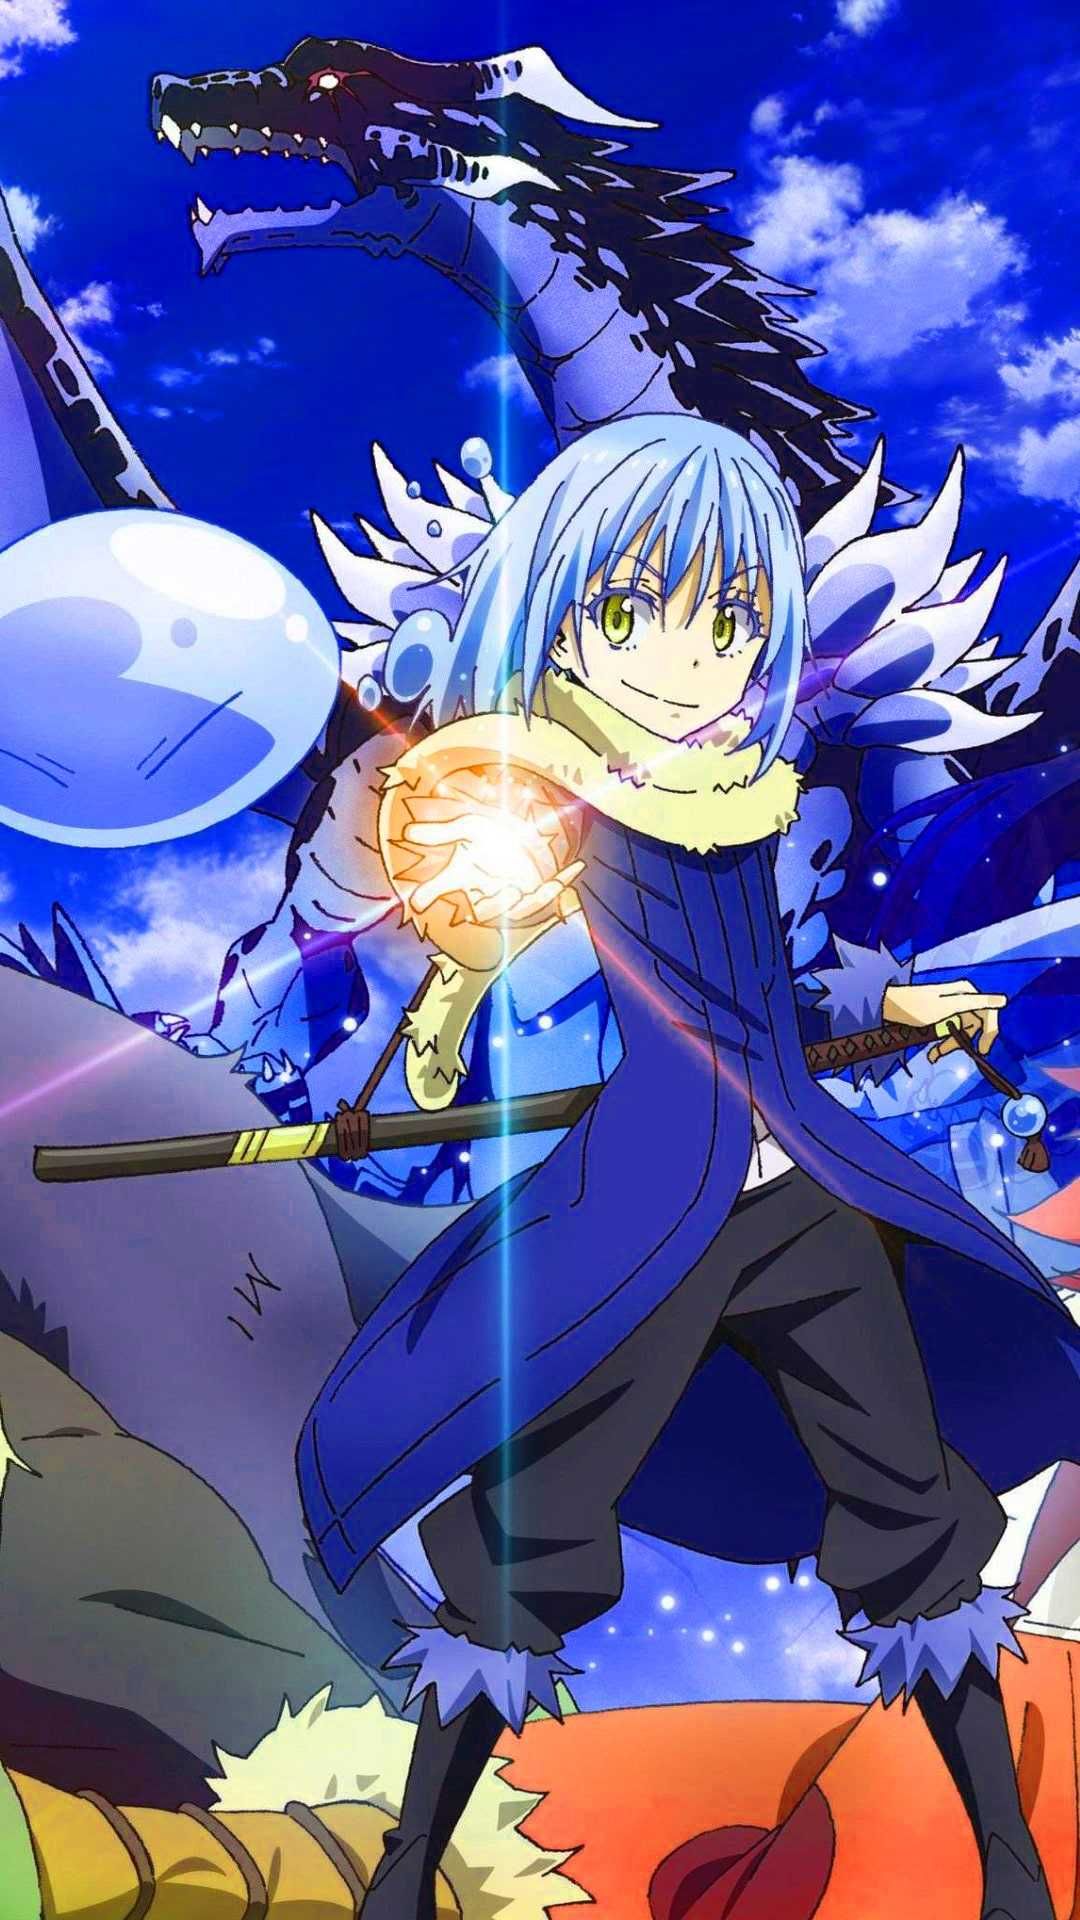 That Time I Got Reincarnated as a Slime Anime Characters Wallpaper